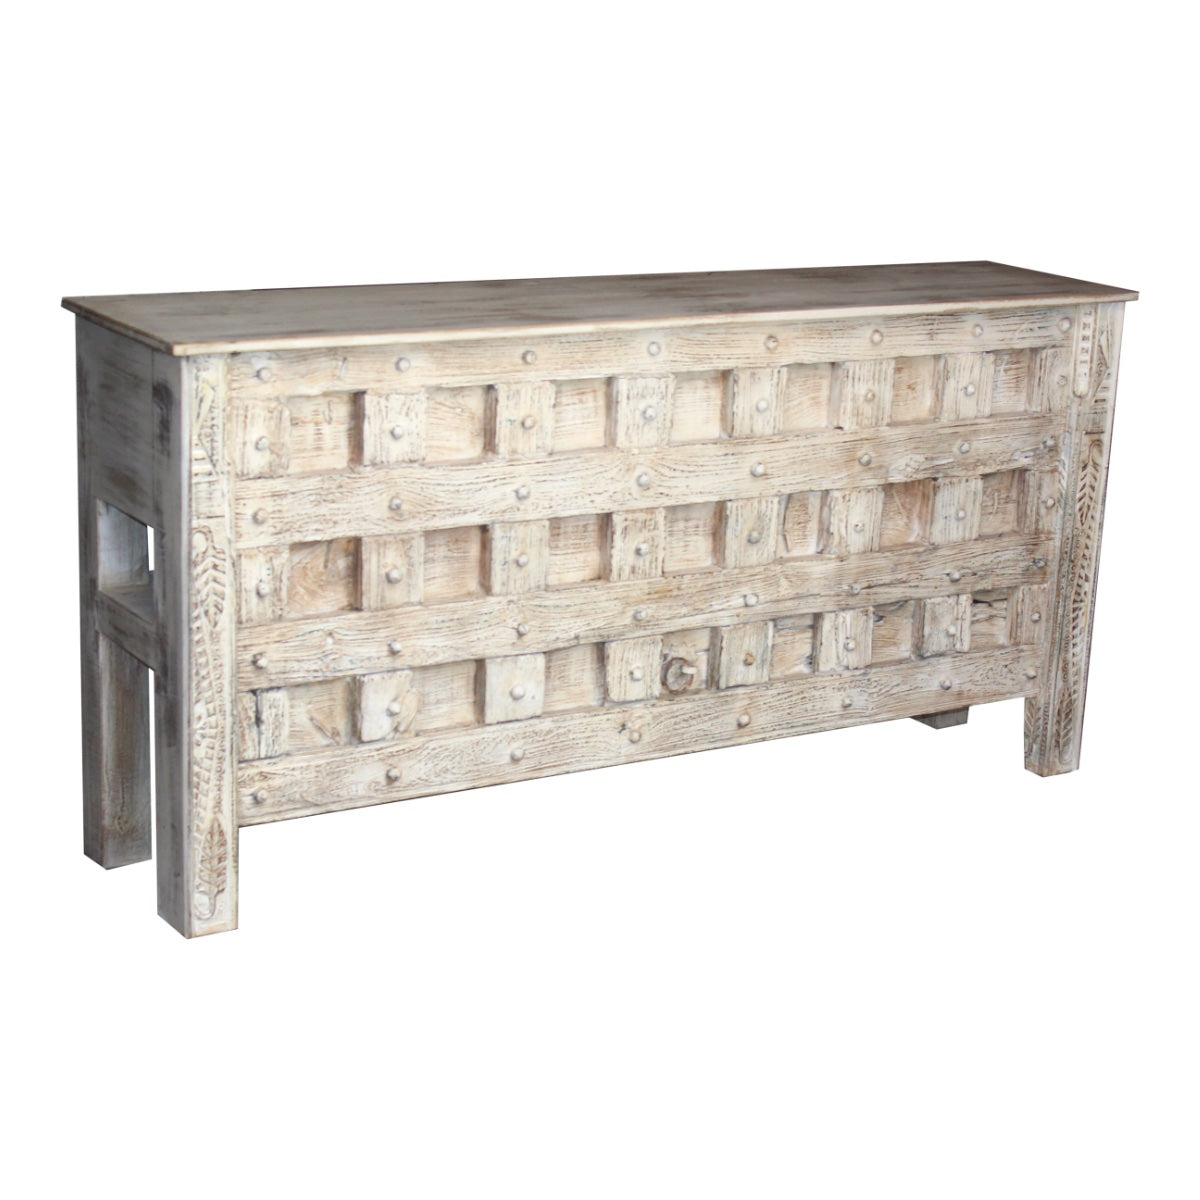 Athani Indian Timber Console Table